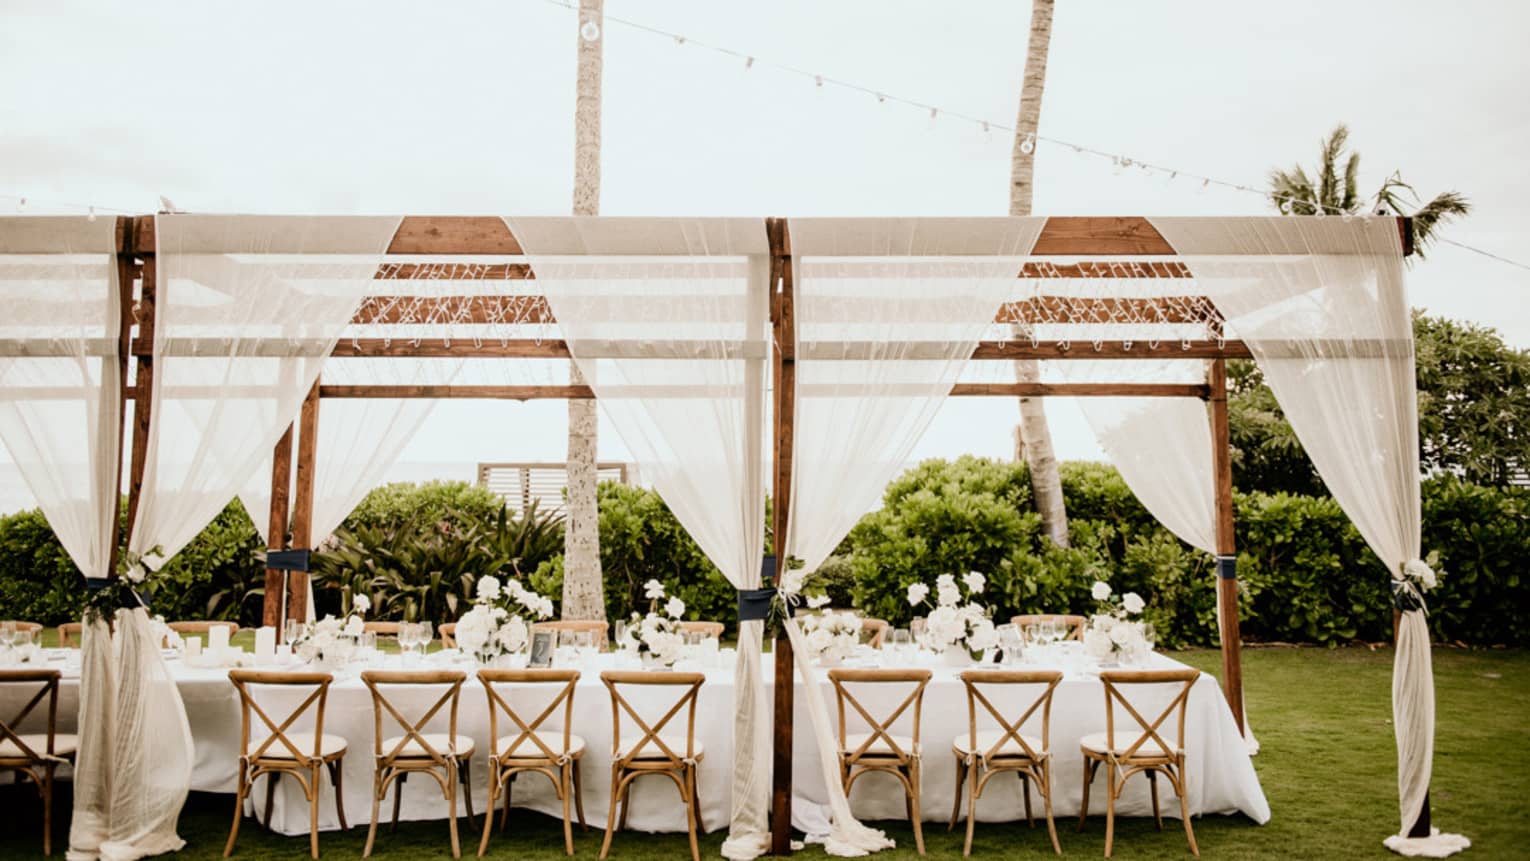 Wedding banquet table setup under pergola on lawn beside palm trees